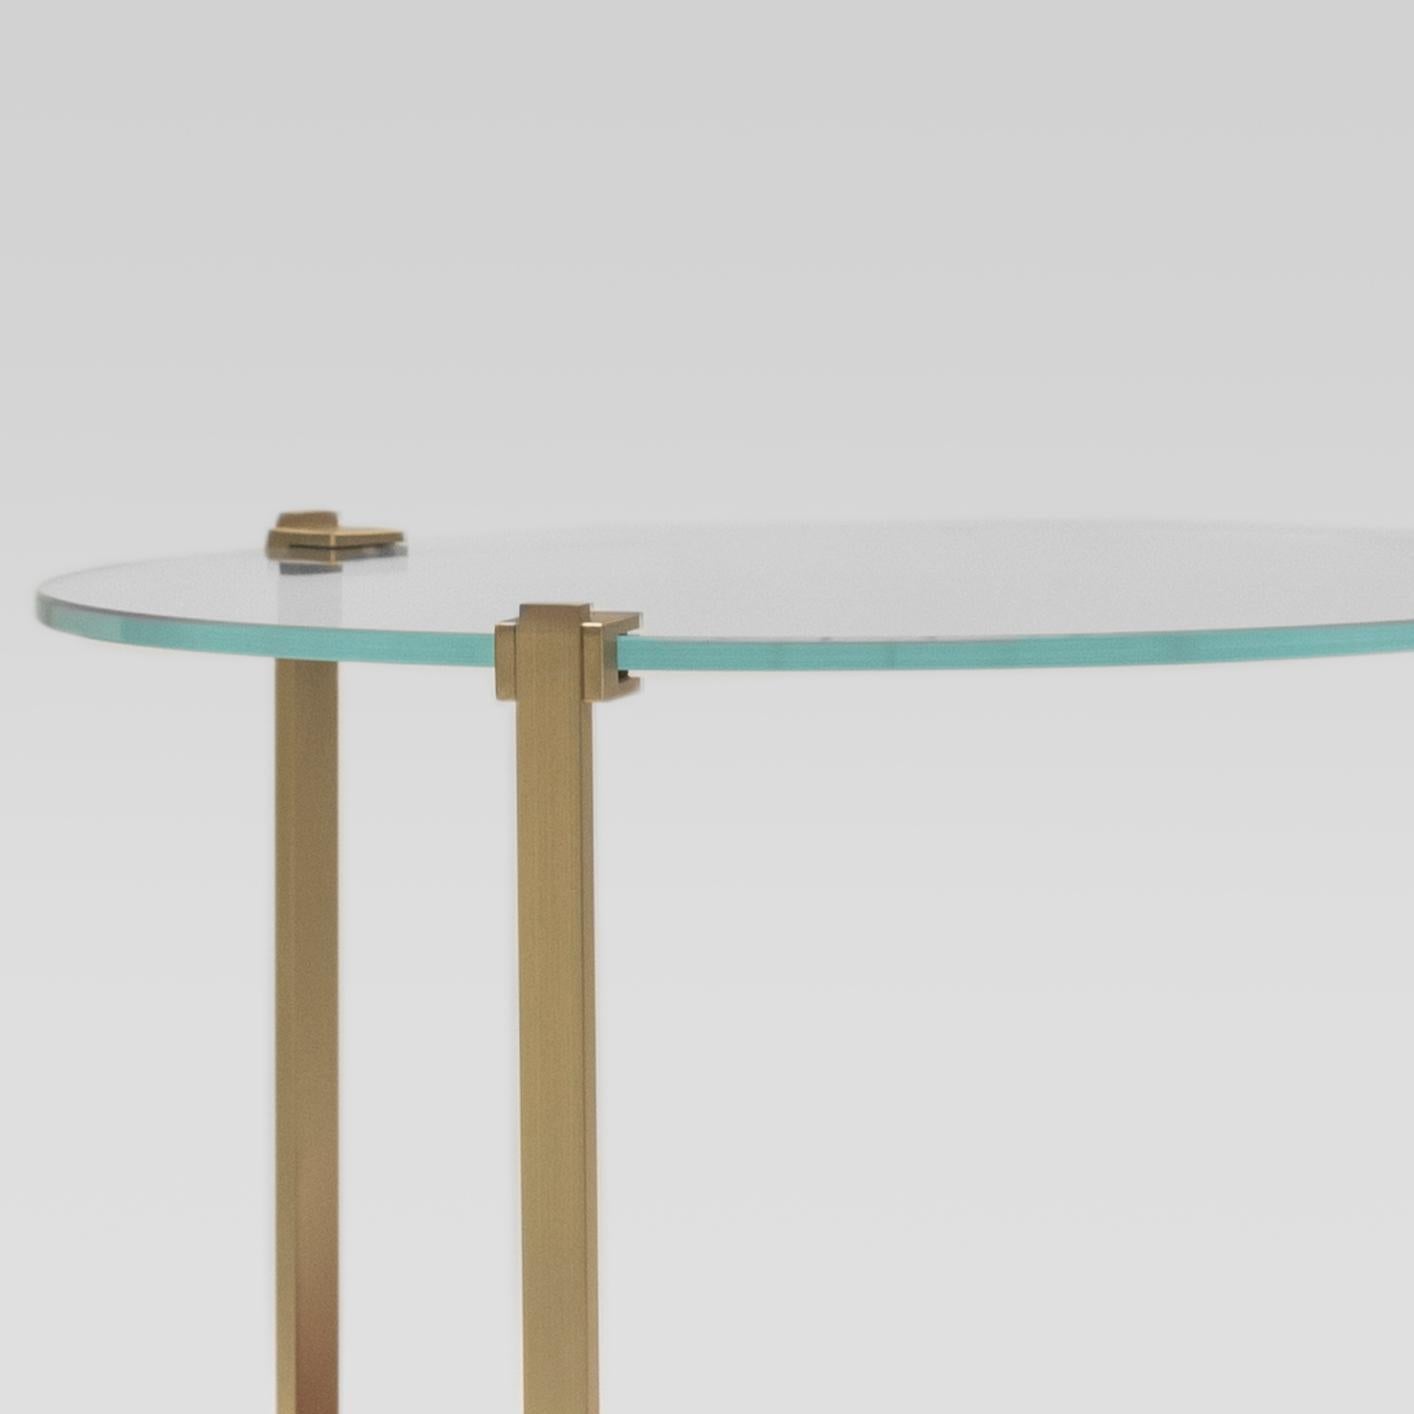 Contemporary side table designed by Peter Ghyczy.
Manufactured by Ghyczy (Netherlands)

The T79 is versatile as it is modest. Three stainless steel legs are secured to the glass top by cast metal details. To be ordered in different heights and